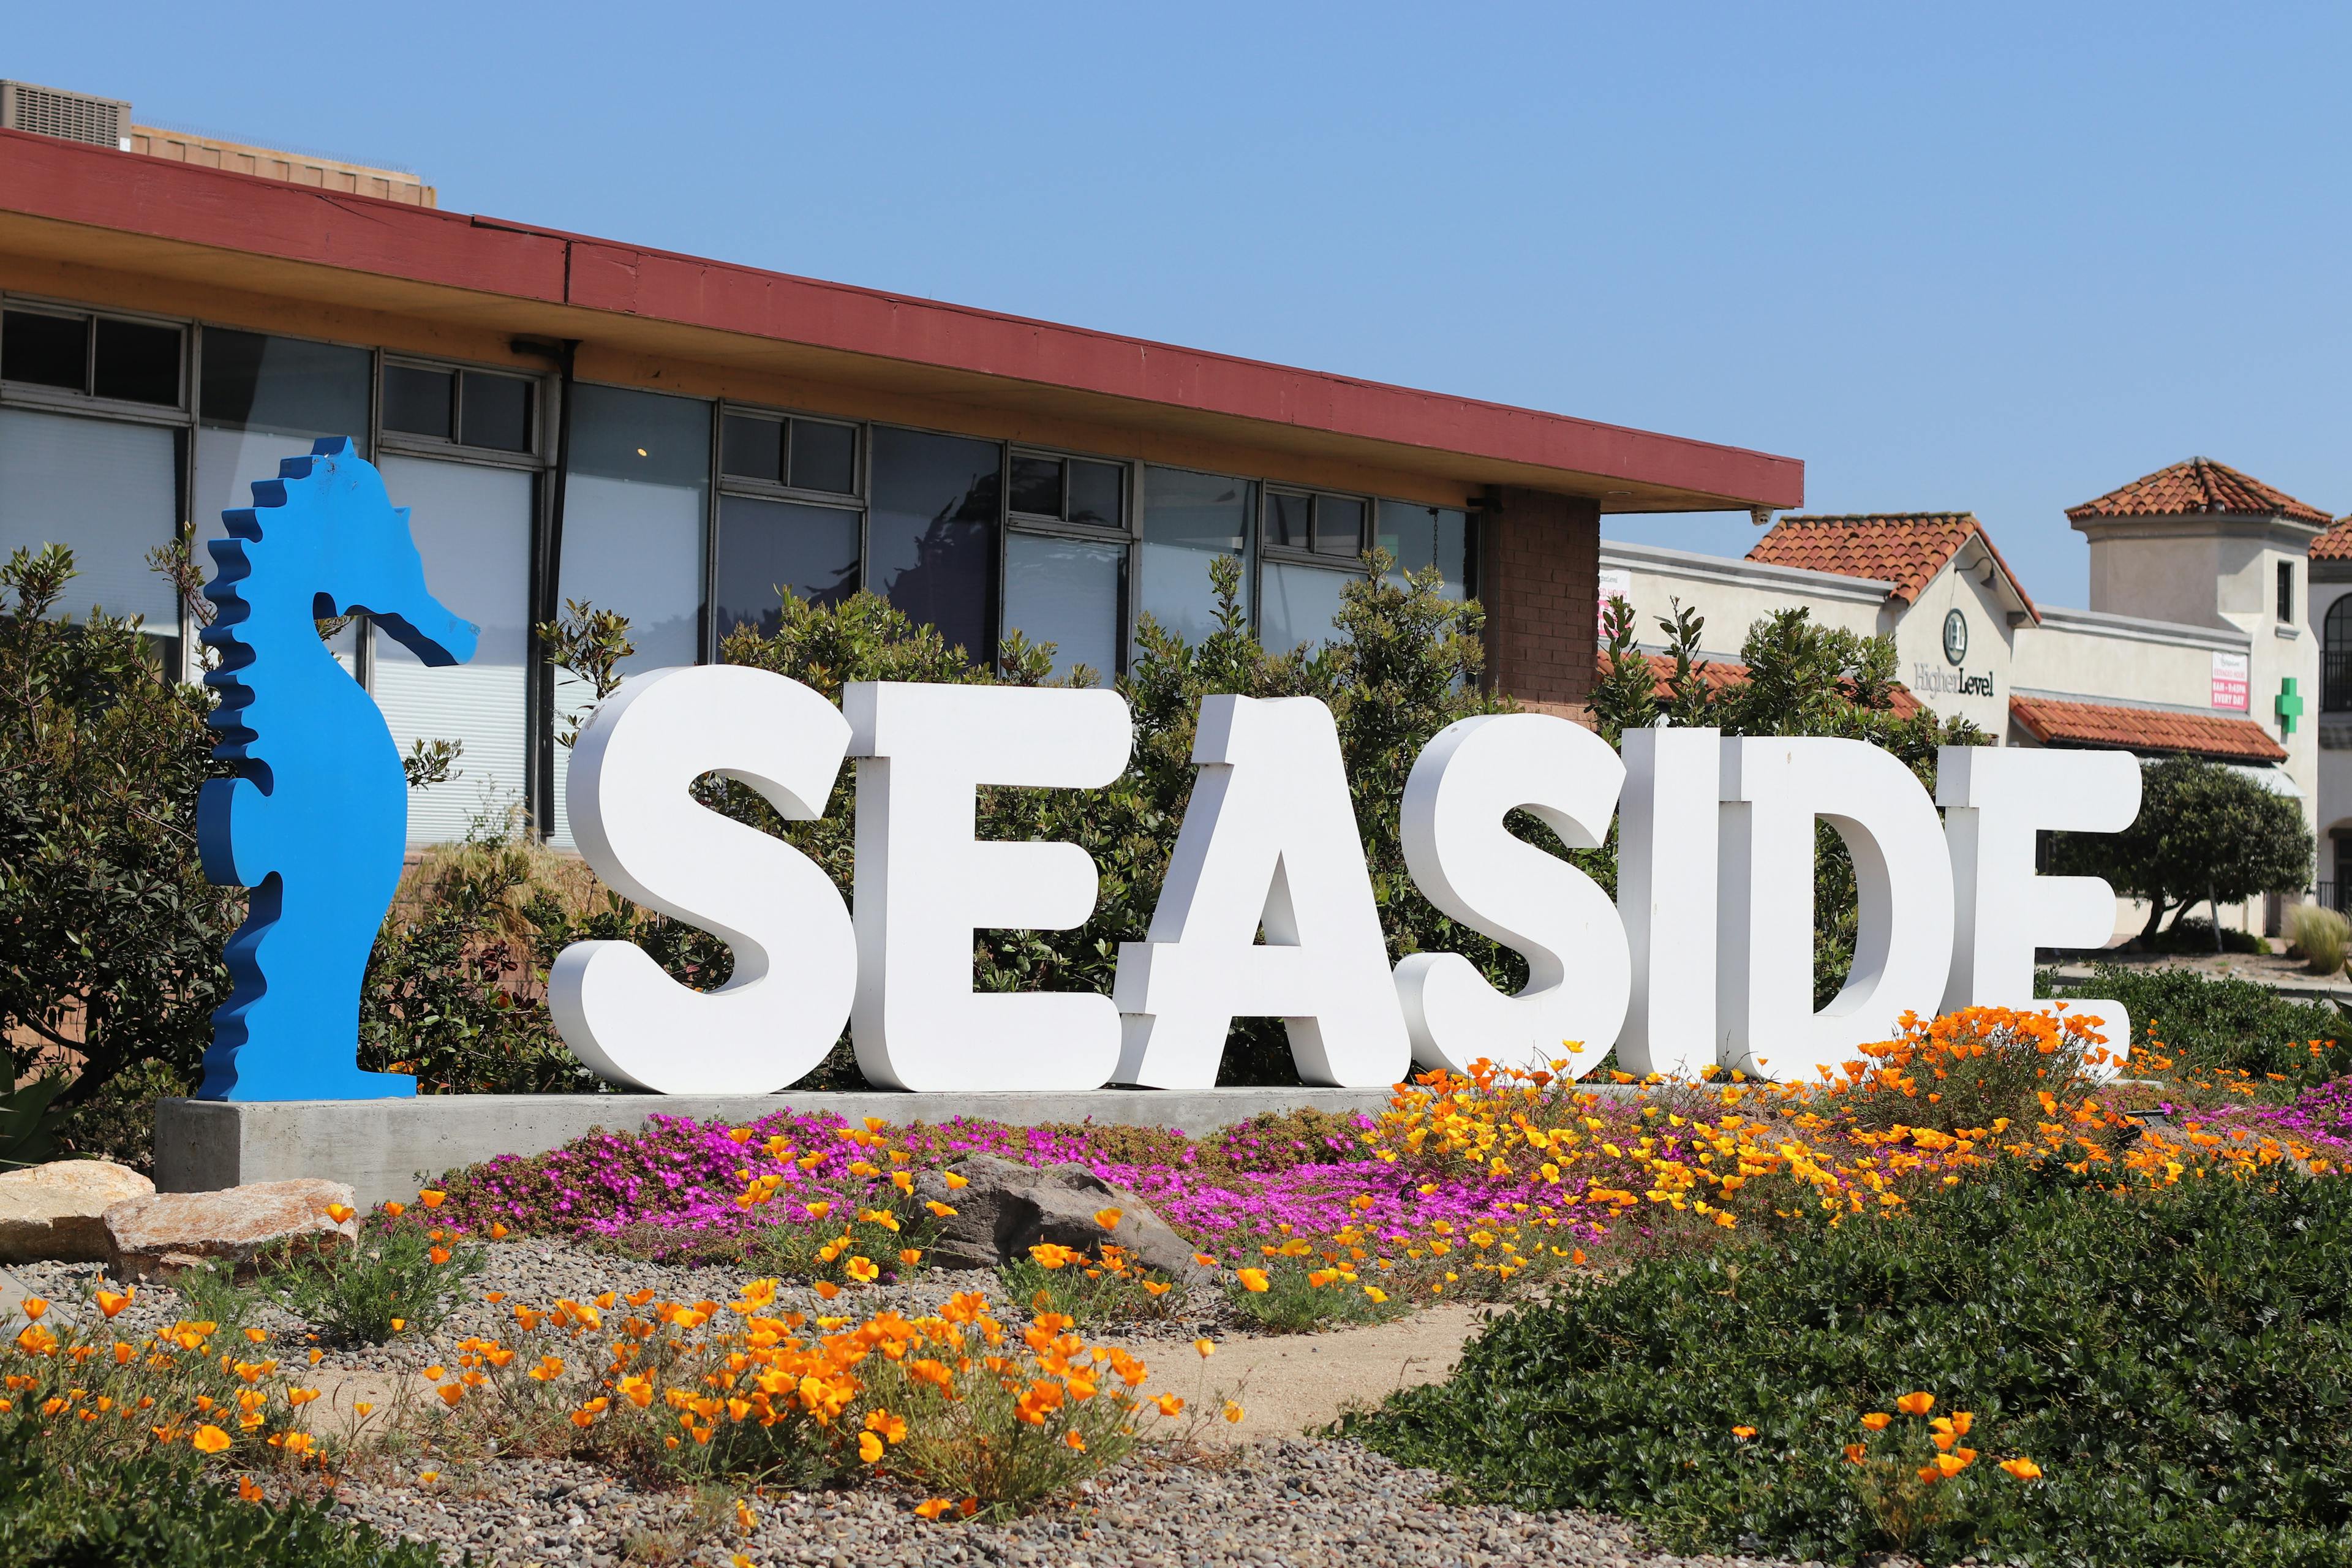 A daytime outdoor image showing a large "SEASIDE" sign with a seahorse silhouette, accompanied by colorful flower beds, suggesting the dispensary's location in a coastal area